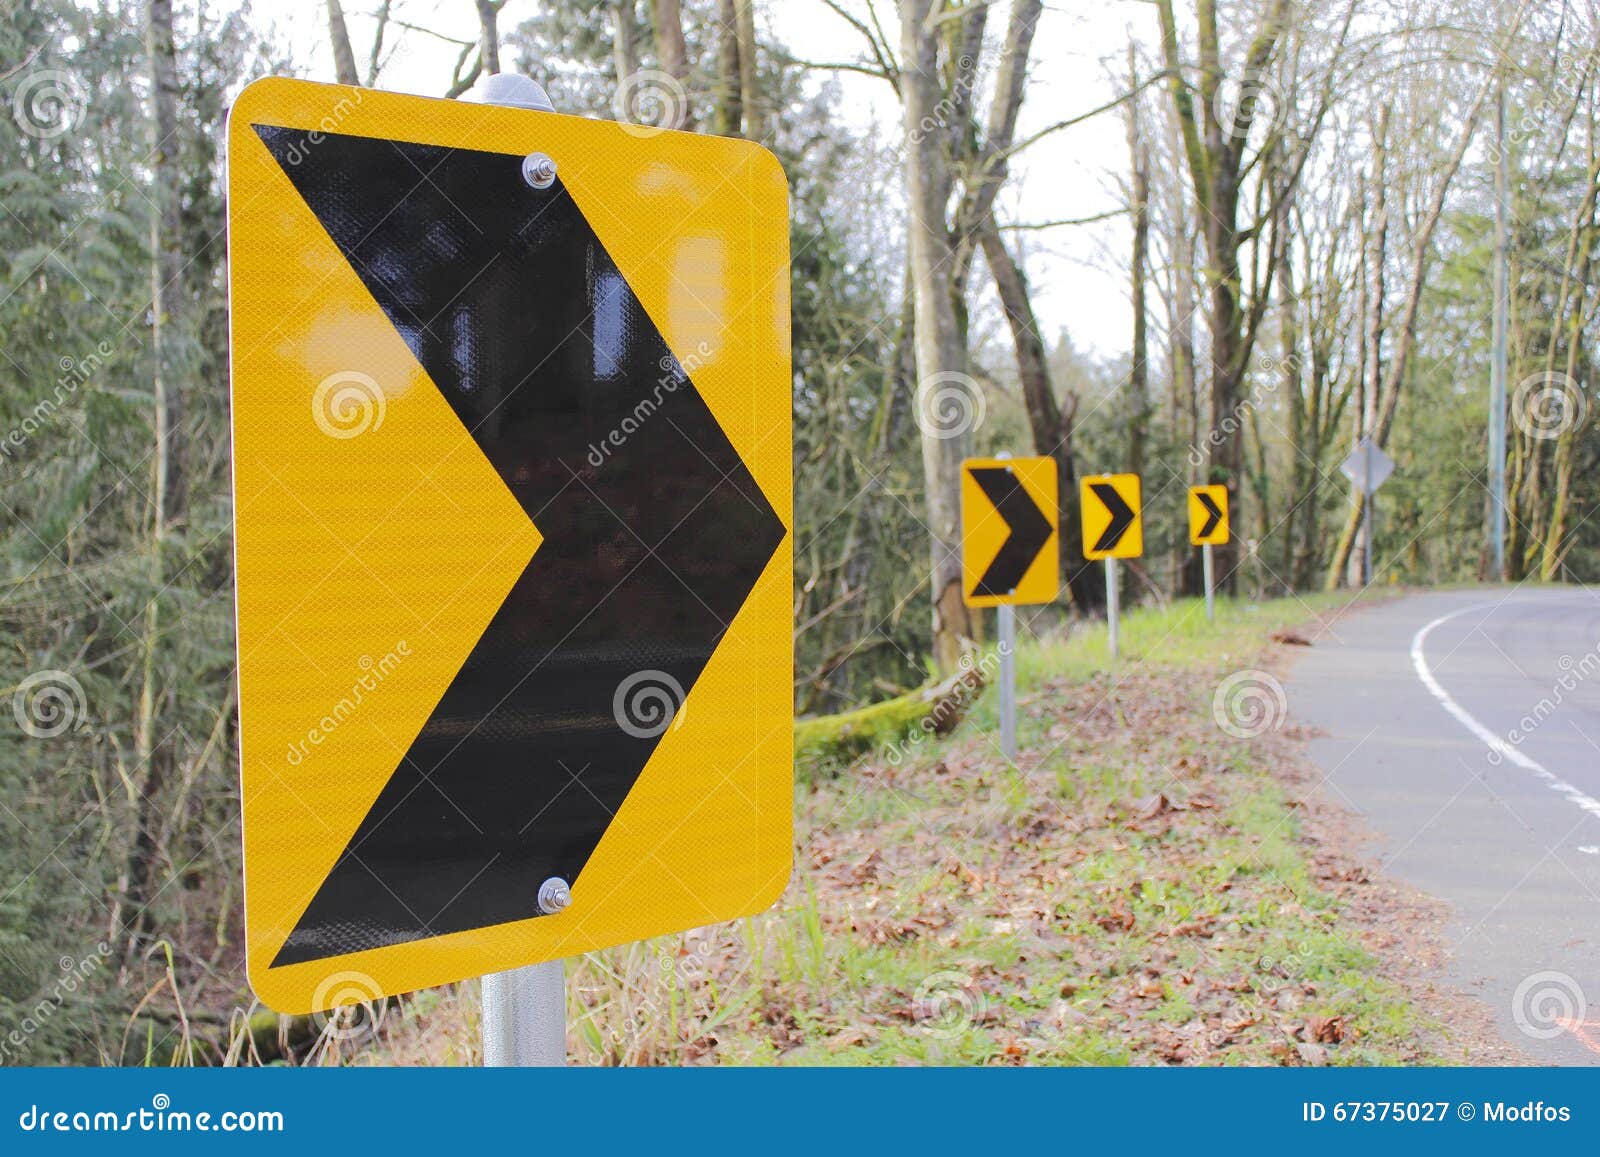 Road Curve Signs Stock Image Image Of Warning Caution 67375027